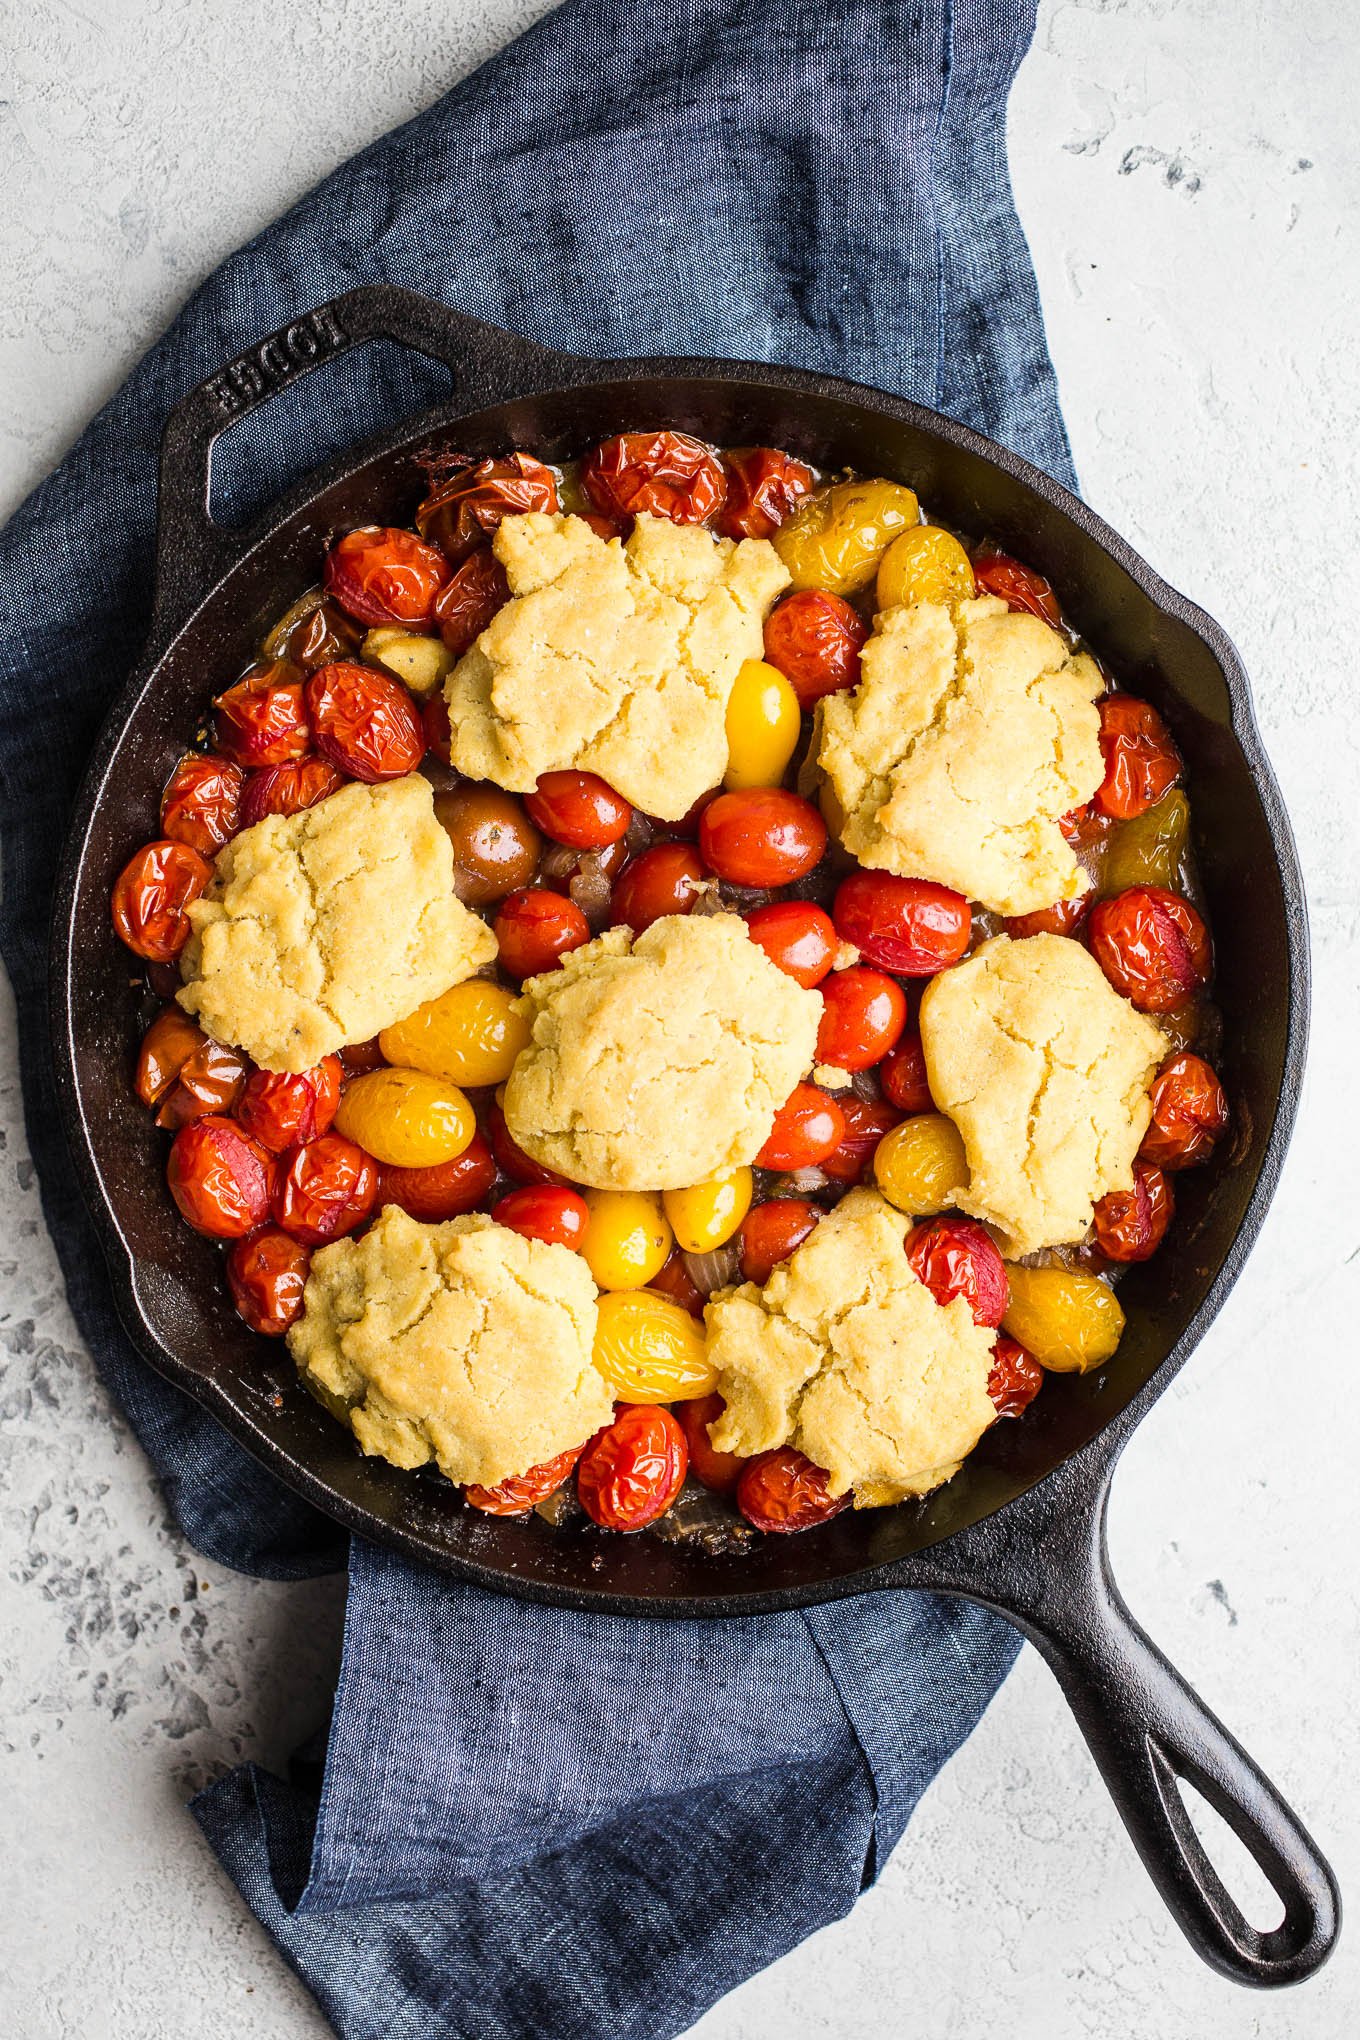 tomatoes and biscuits in skillet